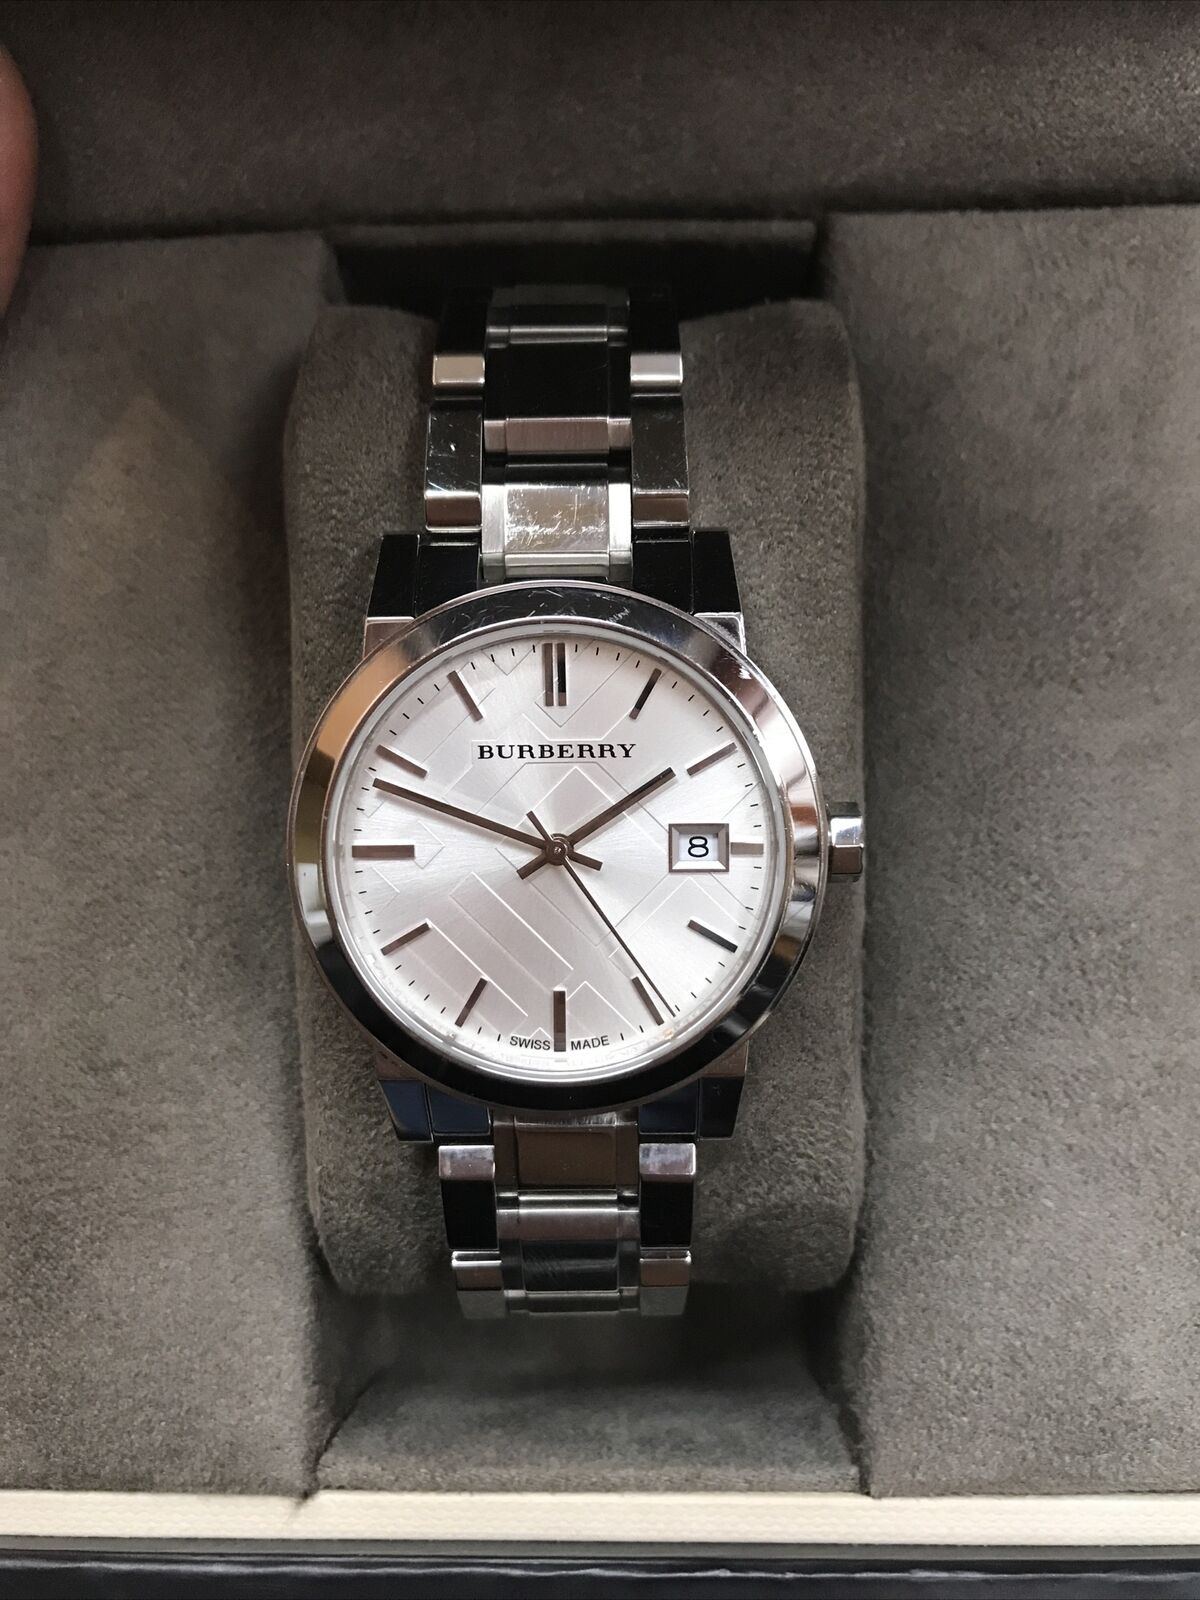 Burberry The City White Dial Silver Steel Strap Watch for Women - BU9100